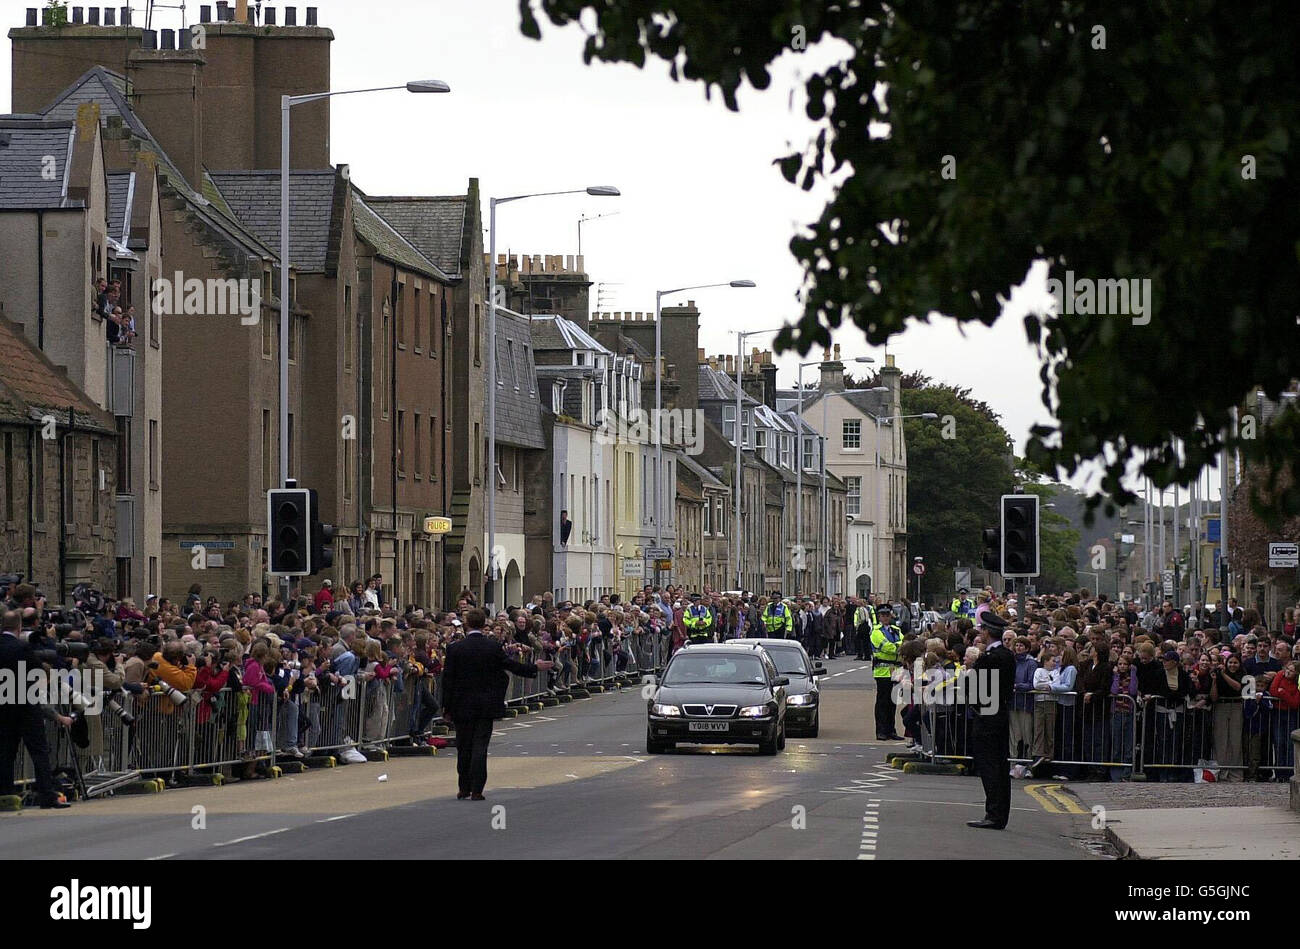 Huge crowds on North Street, St Andrews, Scotland watch as Prince William arrives at St. Andrews University, where he is to study an art history degree. He is being driven in the first car by his father Prince Charles, The Duke of Rothesay. Stock Photo